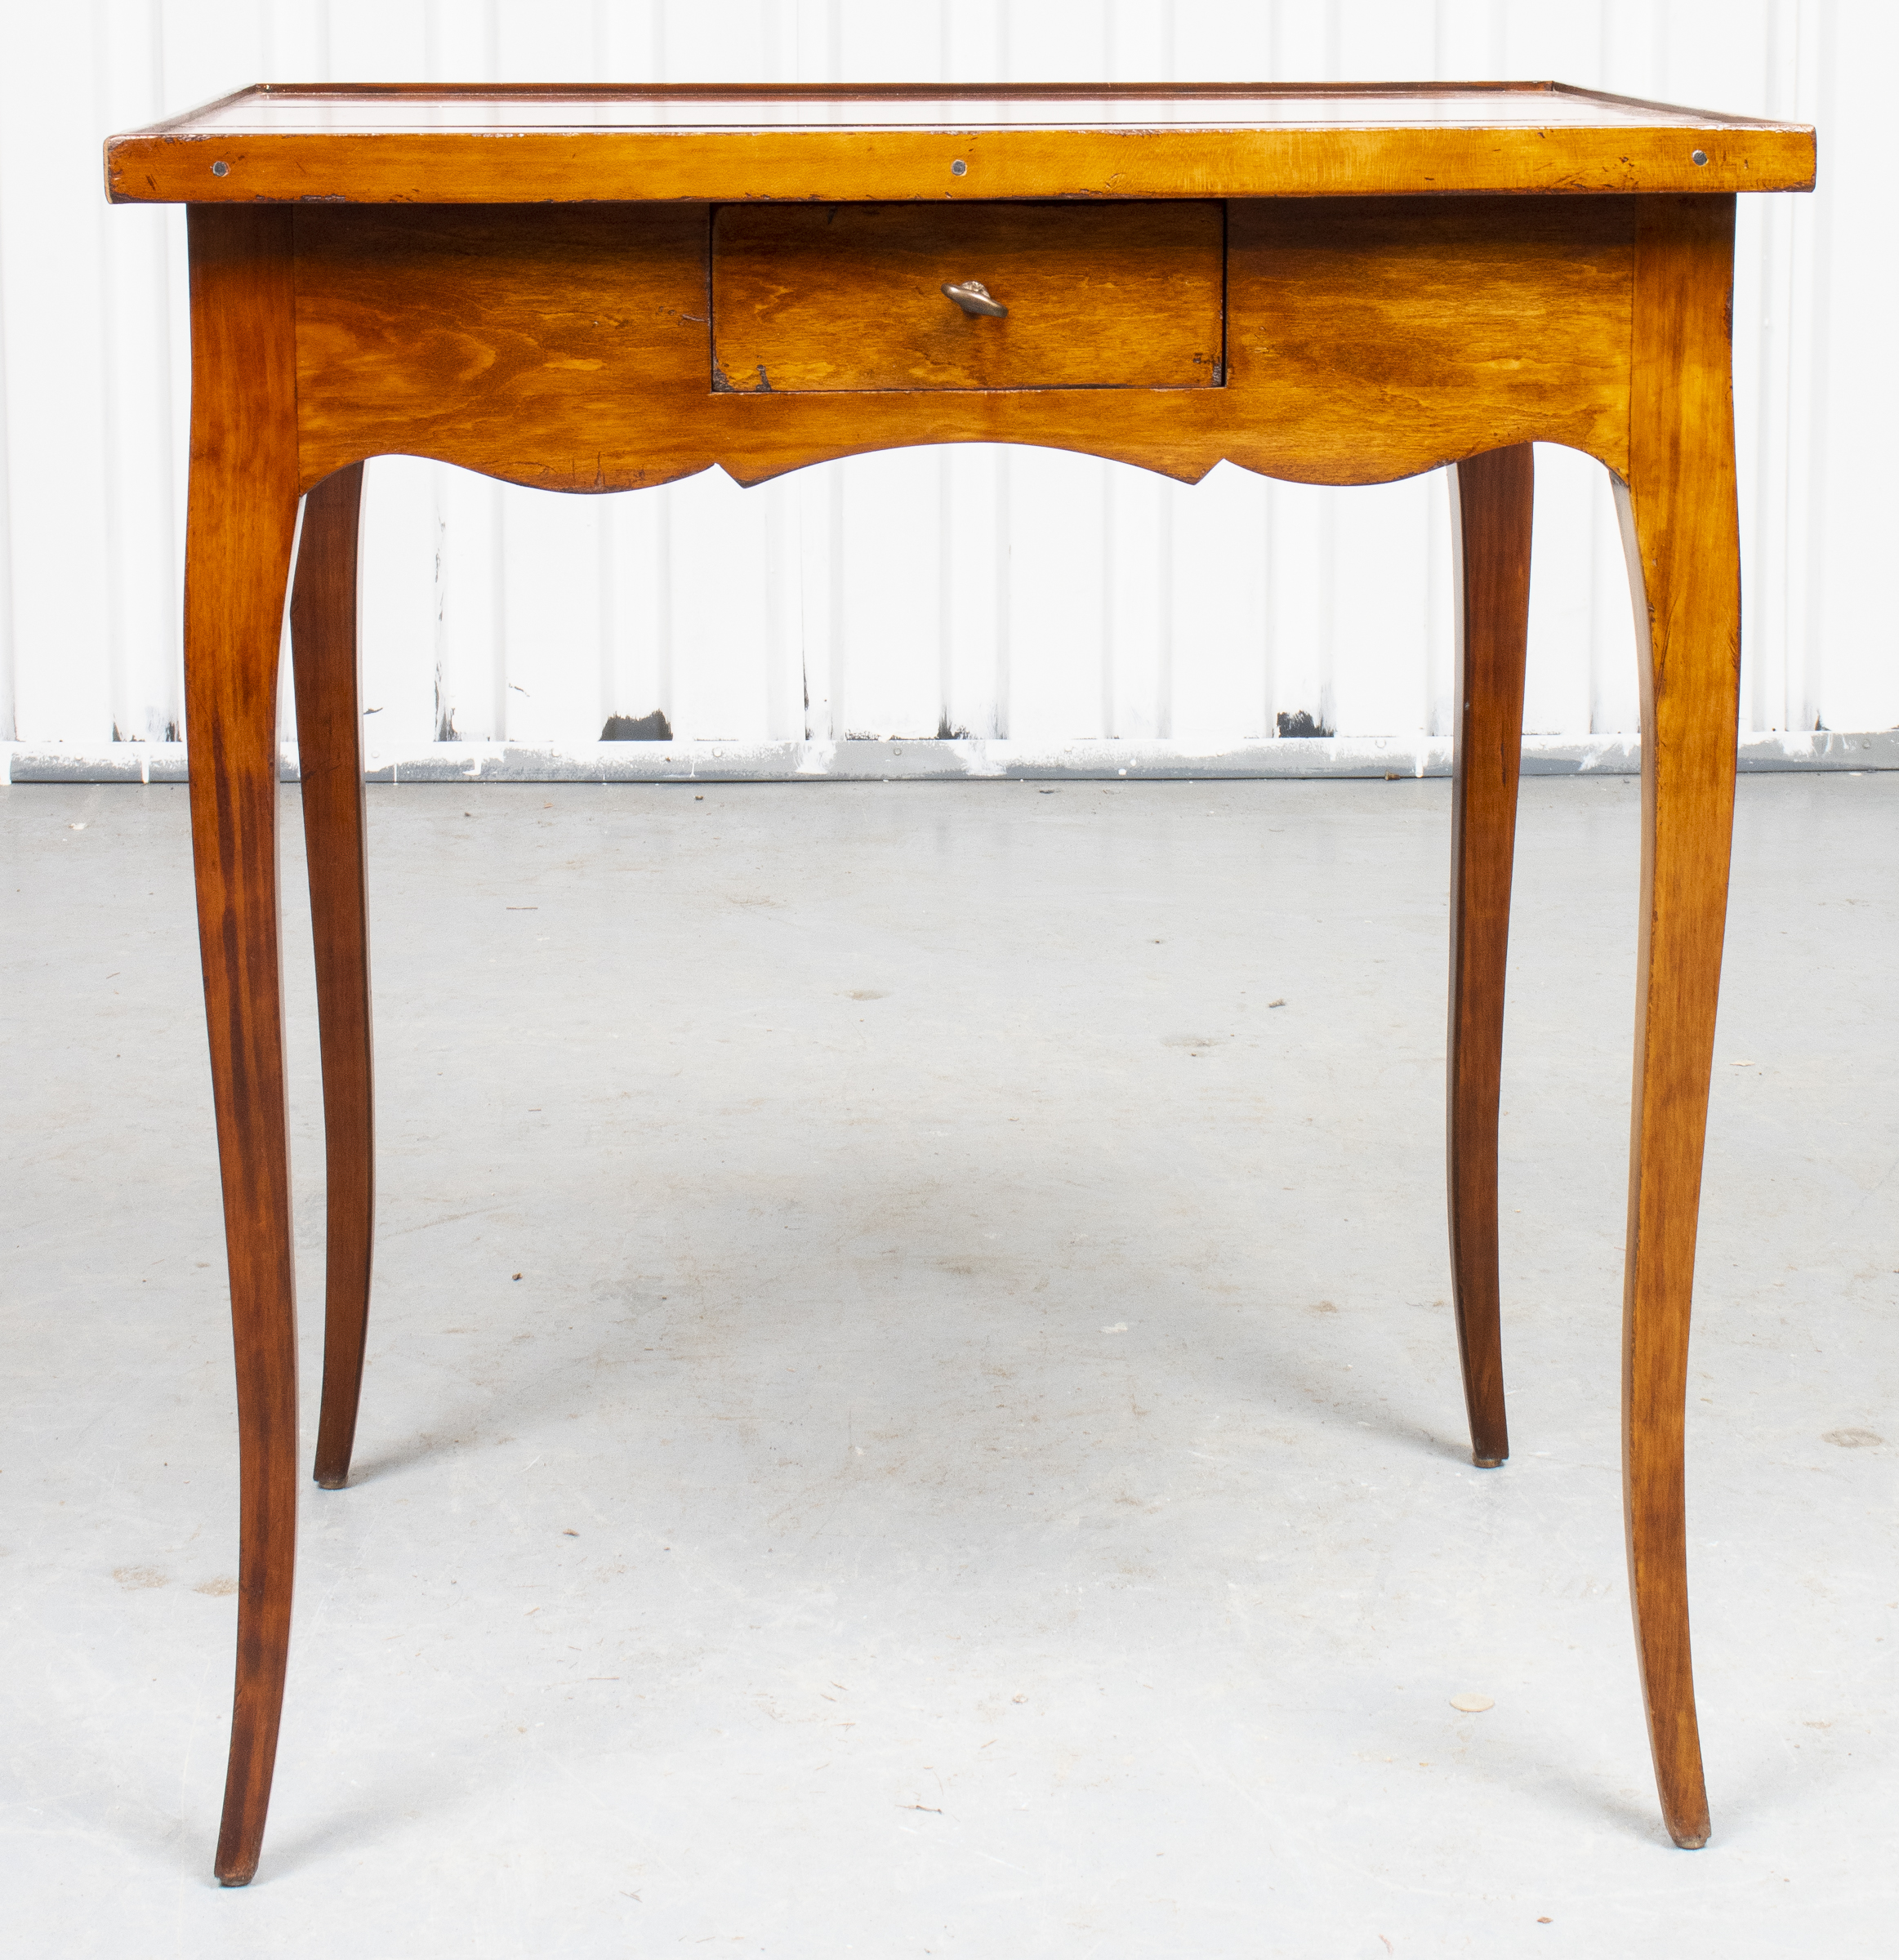 LOUIS XV STYLE FRUITWOOD SIDE TABLE 3c3f6e